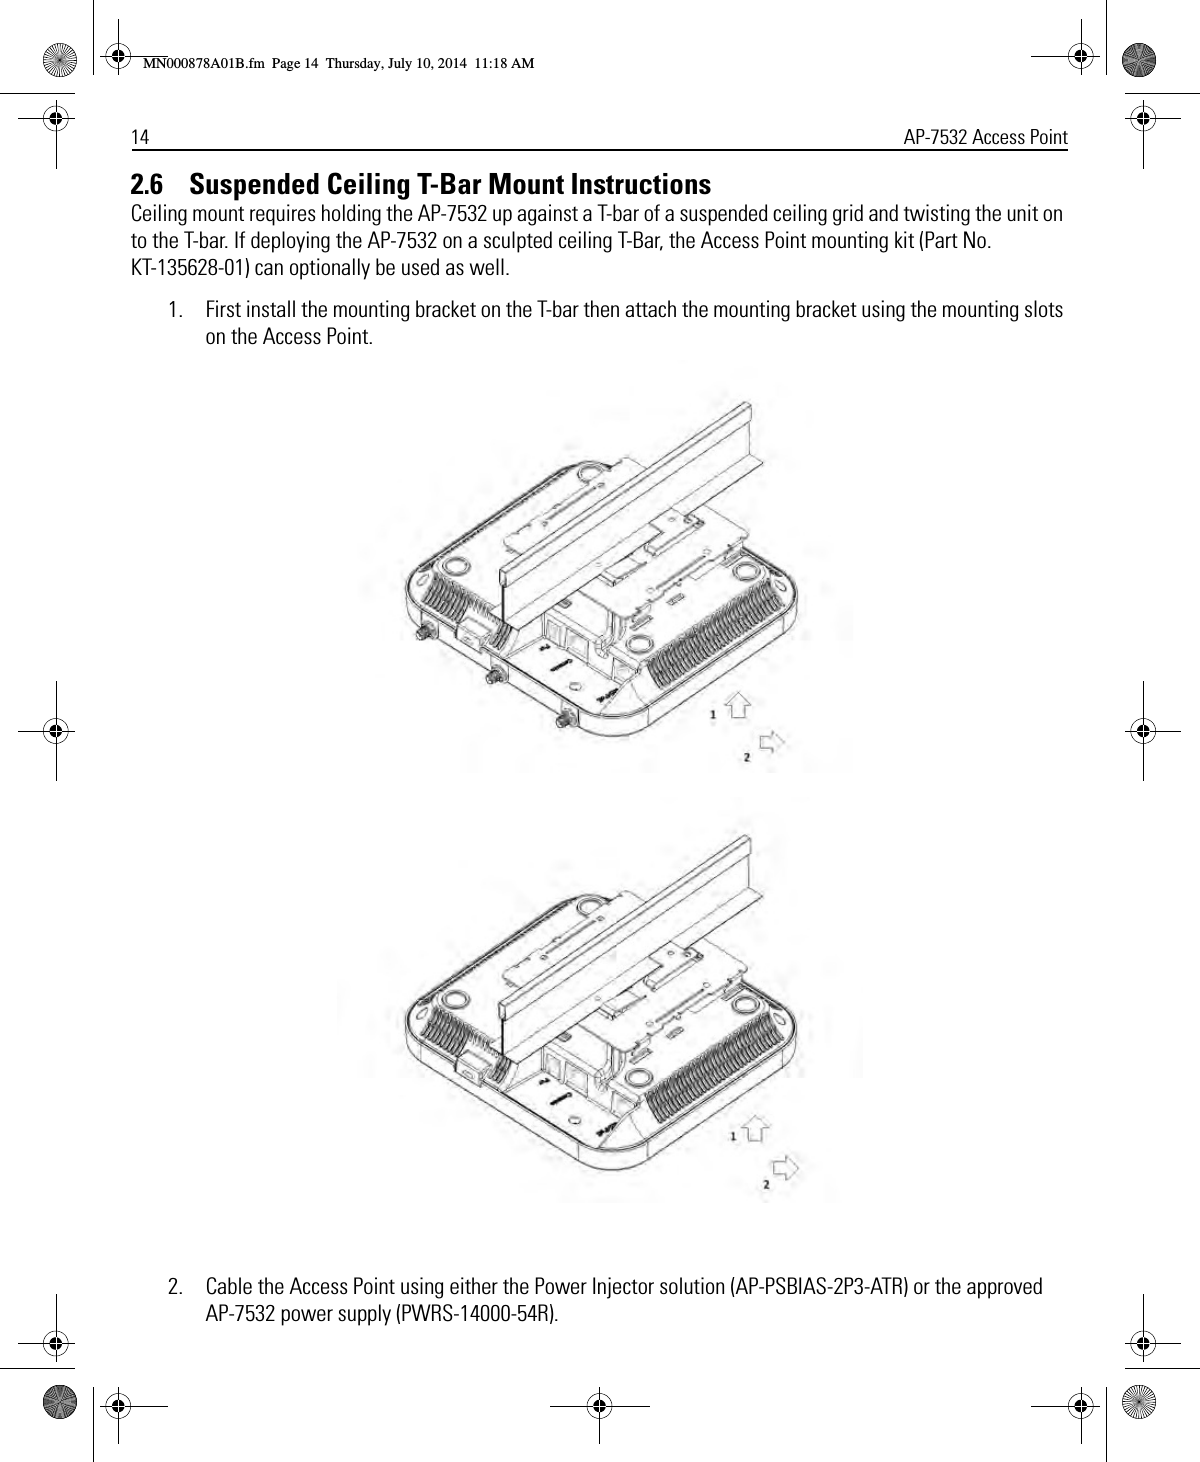 14 AP-7532 Access Point2.6    Suspended Ceiling T-Bar Mount InstructionsCeiling mount requires holding the AP-7532 up against a T-bar of a suspended ceiling grid and twisting the unit on to the T-bar. If deploying the AP-7532 on a sculpted ceiling T-Bar, the Access Point mounting kit (Part No. KT-135628-01) can optionally be used as well.1. First install the mounting bracket on the T-bar then attach the mounting bracket using the mounting slots on the Access Point.2. Cable the Access Point using either the Power Injector solution (AP-PSBIAS-2P3-ATR) or the approved AP-7532 power supply (PWRS-14000-54R).MN000878A01B.fm  Page 14  Thursday, July 10, 2014  11:18 AM